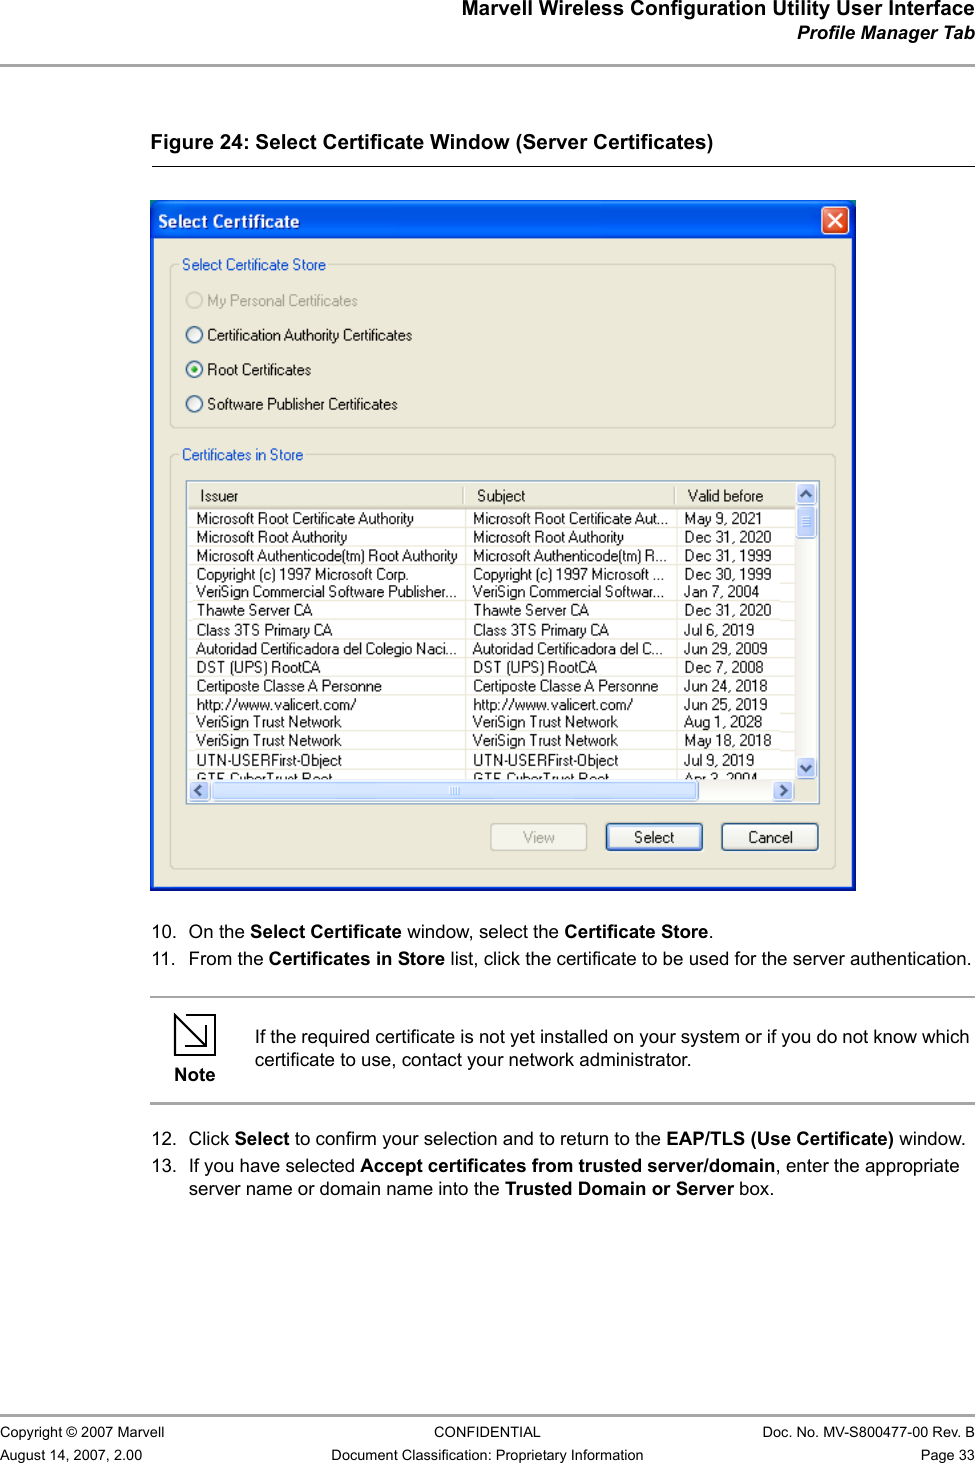 Marvell Wireless Configuration Utility User InterfaceProfile Manager Tab                         Copyright © 2007 Marvell CONFIDENTIAL Doc. No. MV-S800477-00 Rev. BAugust 14, 2007, 2.00 Document Classification: Proprietary Information Page 33                          10. On the Select Certificate window, select the Certificate Store.11. From the Certificates in Store list, click the certificate to be used for the server authentication.12. Click Select to confirm your selection and to return to the EAP/TLS (Use Certificate) window.13. If you have selected Accept certificates from trusted server/domain, enter the appropriate server name or domain name into the Trusted Domain or Server box.Figure 24: Select Certificate Window (Server Certificates)                         NoteIf the required certificate is not yet installed on your system or if you do not know which certificate to use, contact your network administrator.